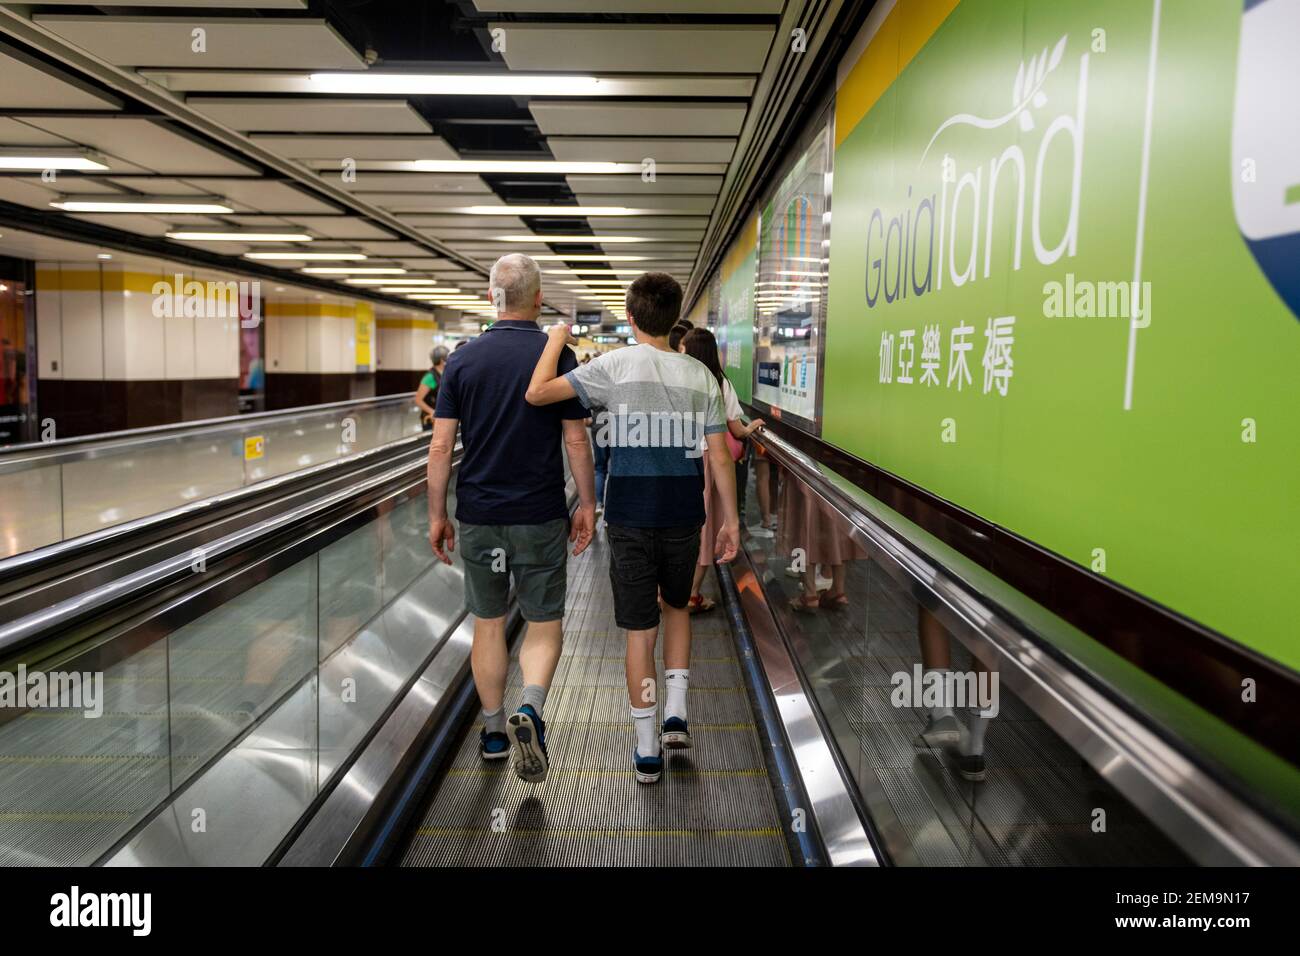 Hong Kong,China:18 Oct,2020.   In the large underground MTR network in Hong Kong, distances are cut with long travelators or moving walkways. Travelin Stock Photo